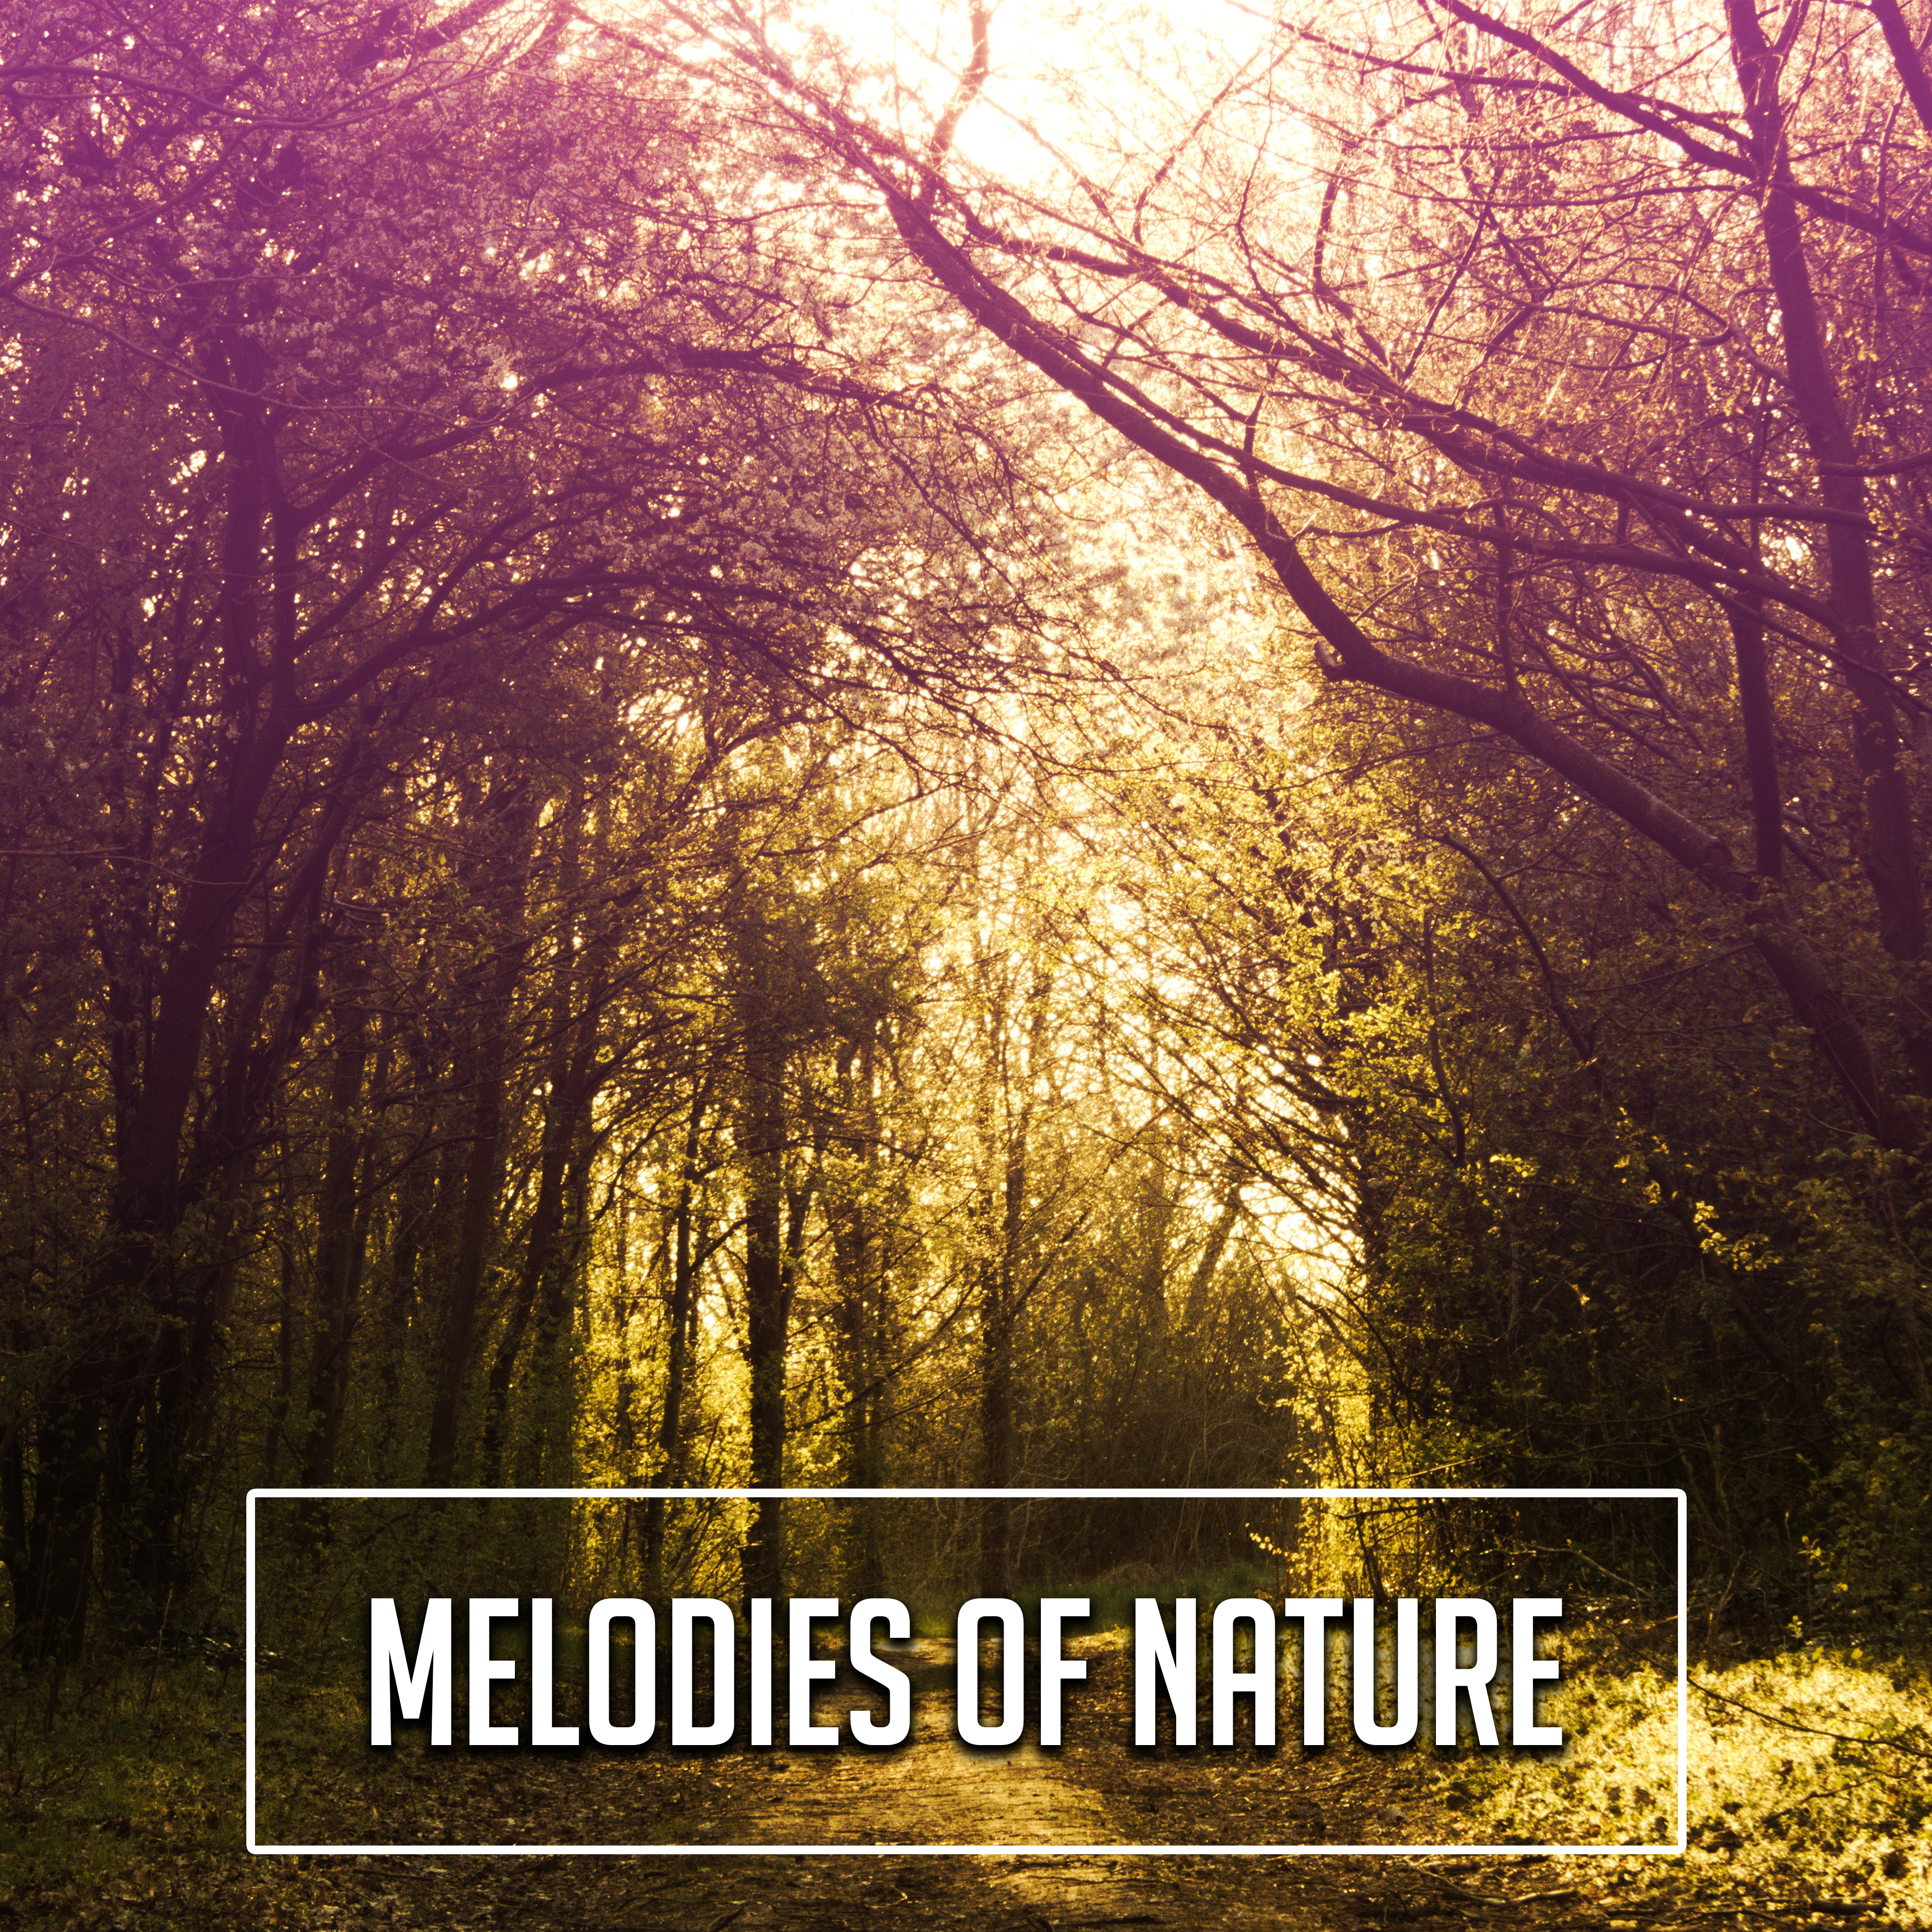 Melodies of Nature  Soft Music, Relaxing Therapy, Stress Free, Deep Meditation, Rest, Nature Sounds, Tranquility